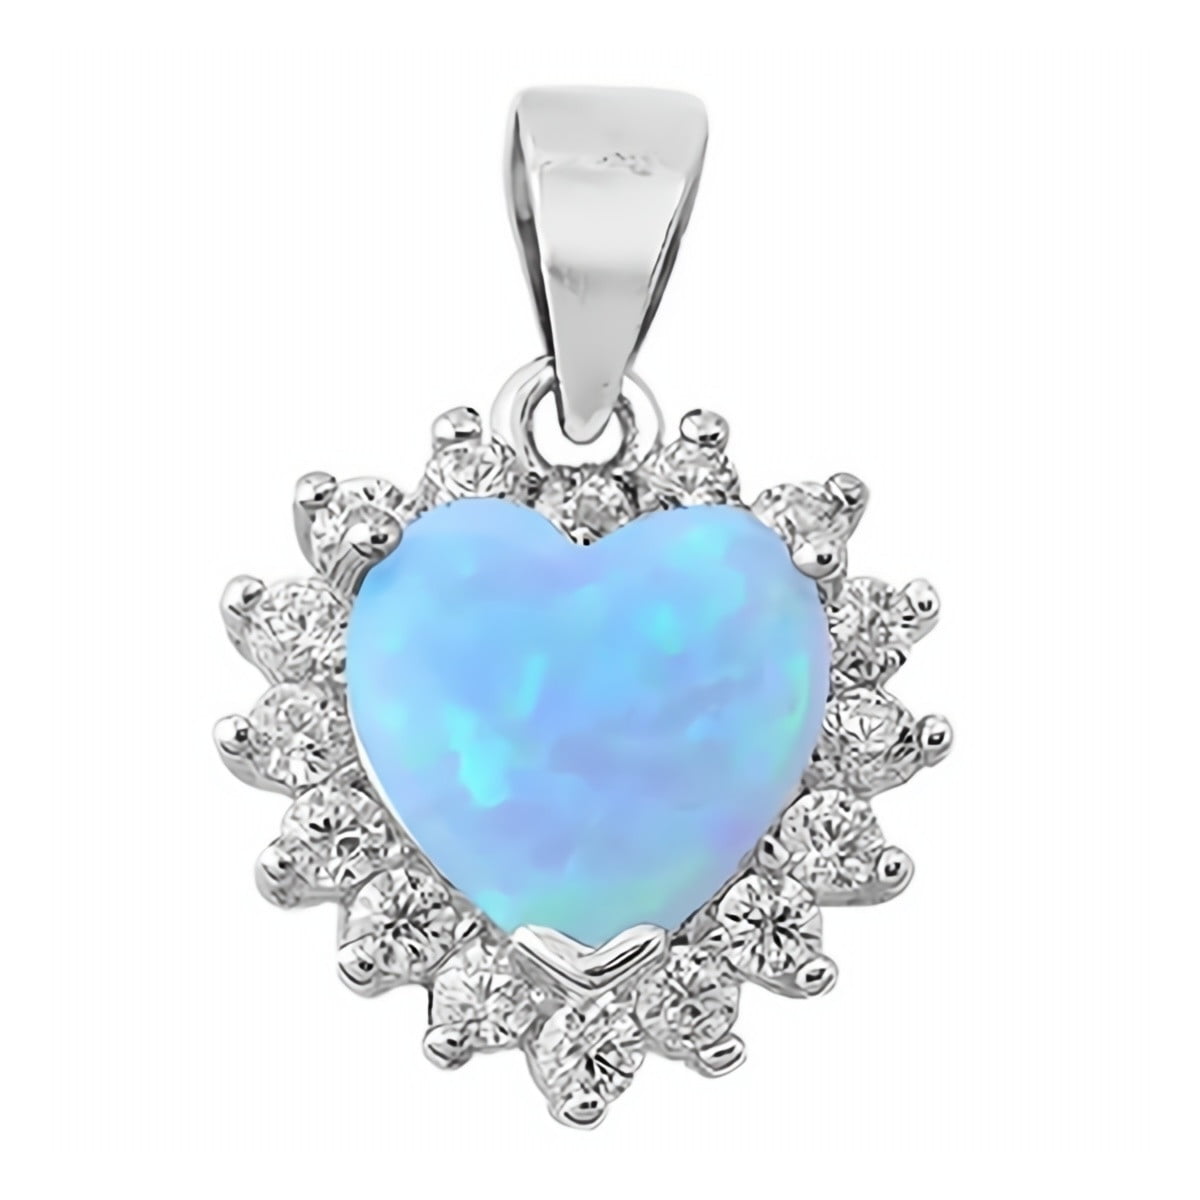 Spiral Glitzs Jewels 925 Sterling Silver Created Opal Pendant for Necklace in Gift Box White